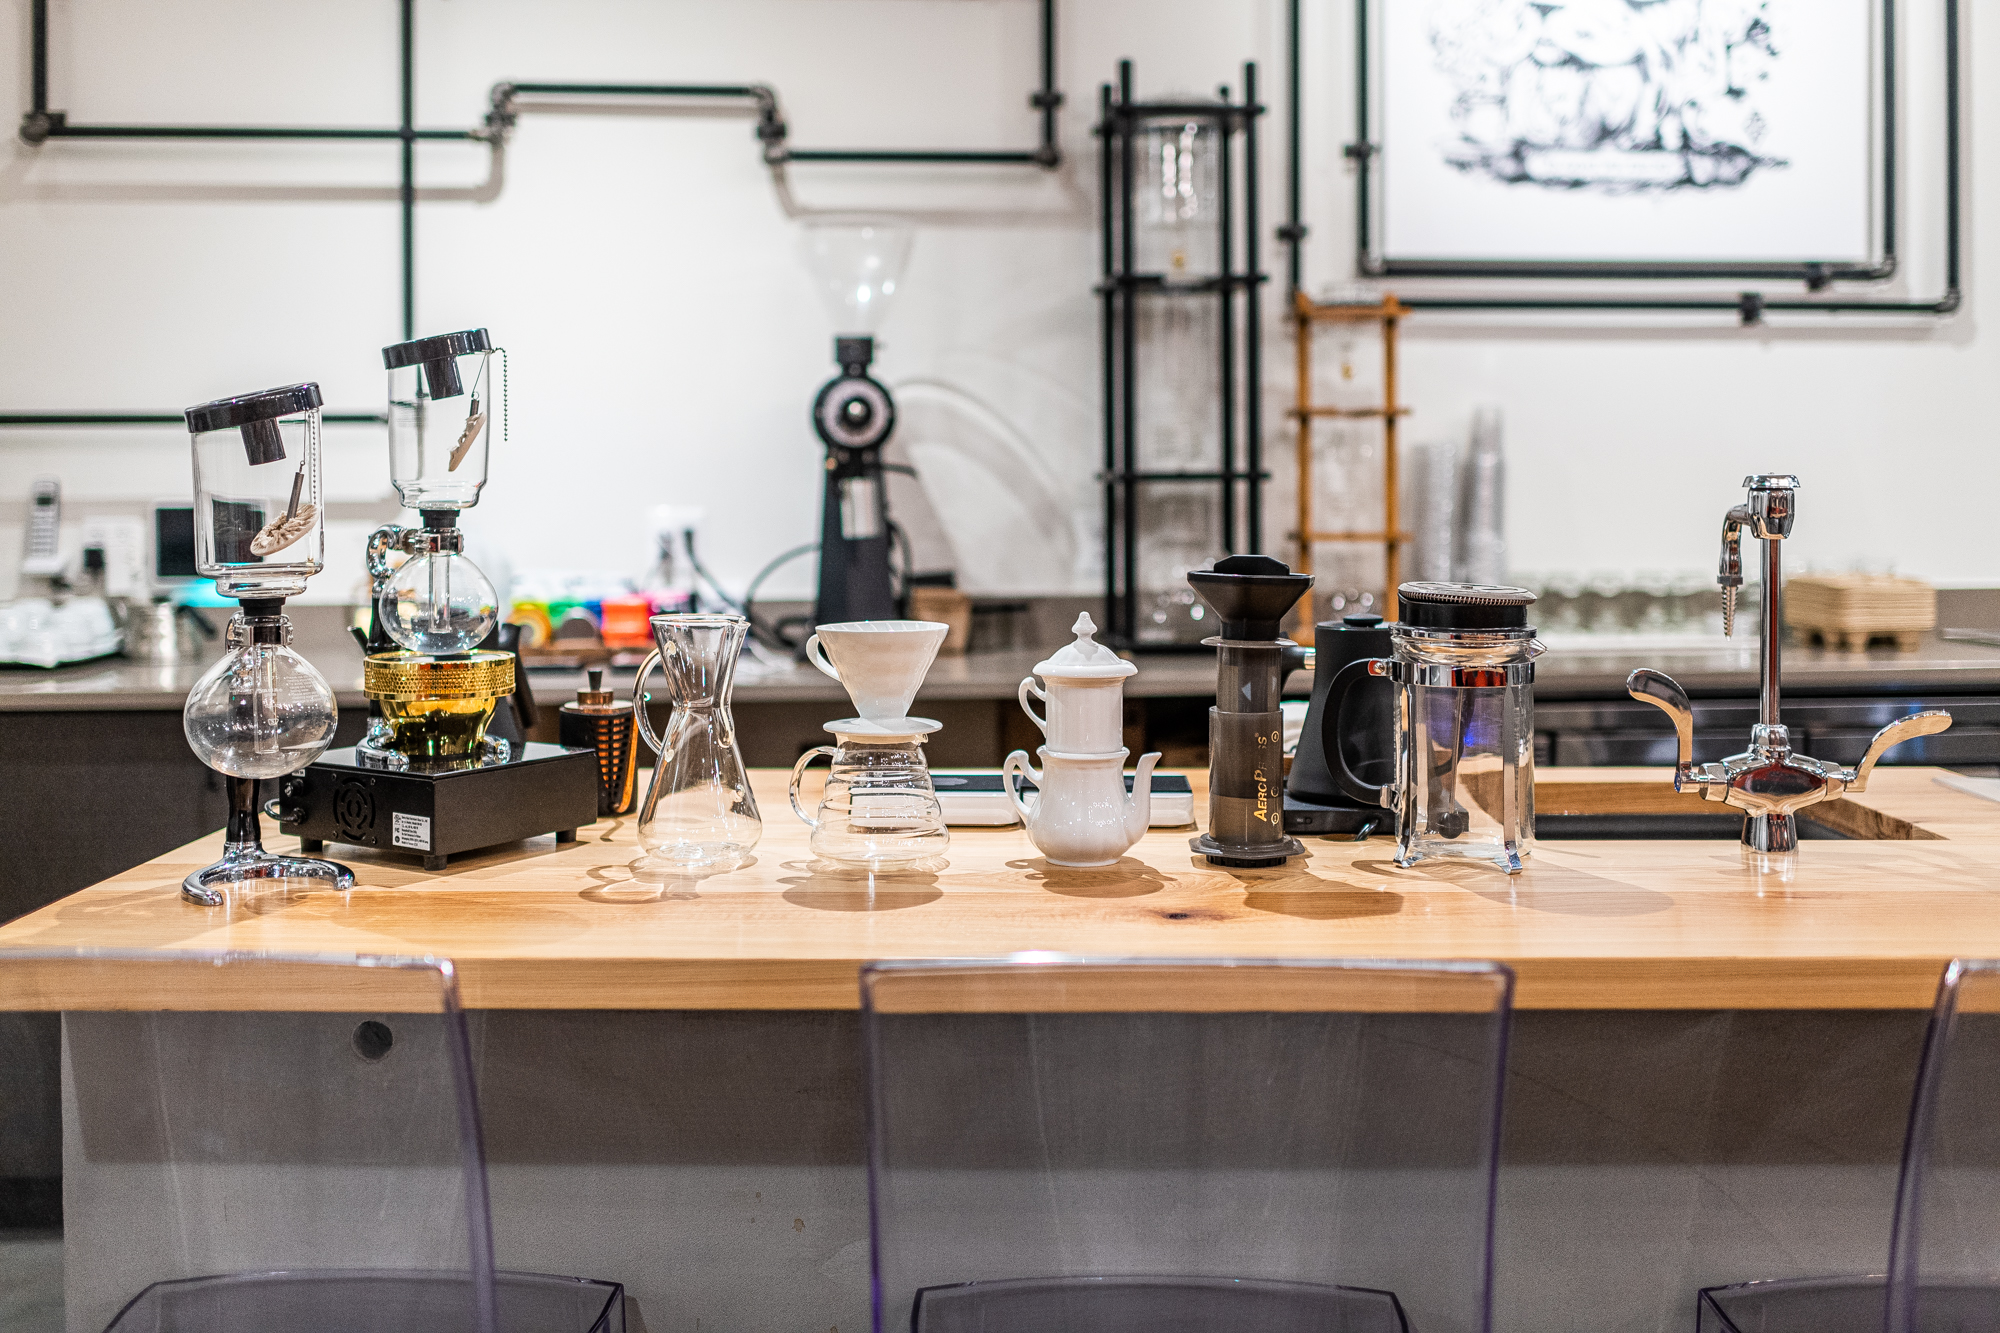 A host of different brewing devices sit on a wooden countertop inside Sweet Science.